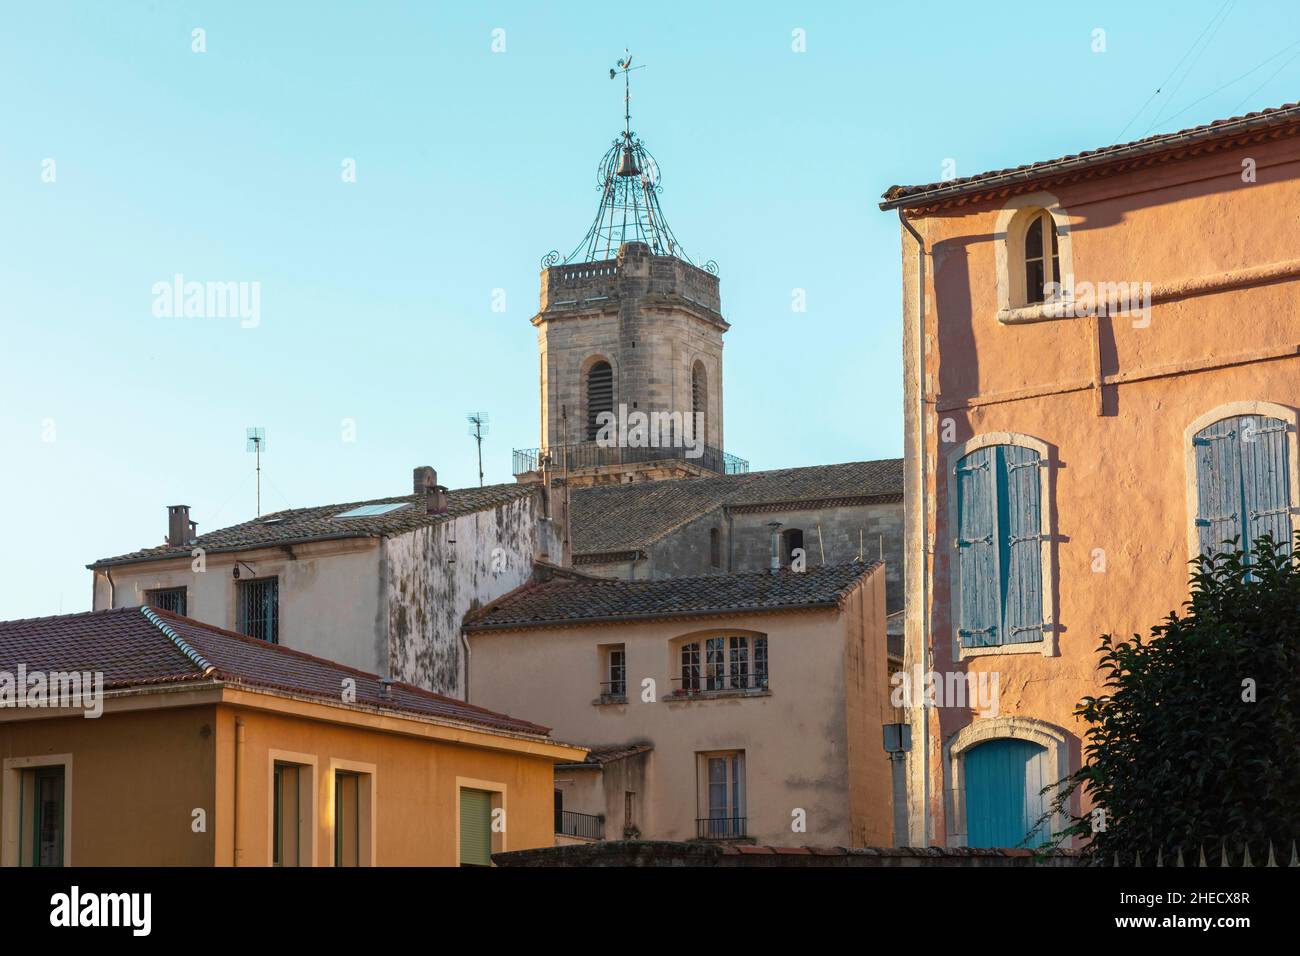 France, Herault, Pezenas, bell tower of a southern village Stock Photo